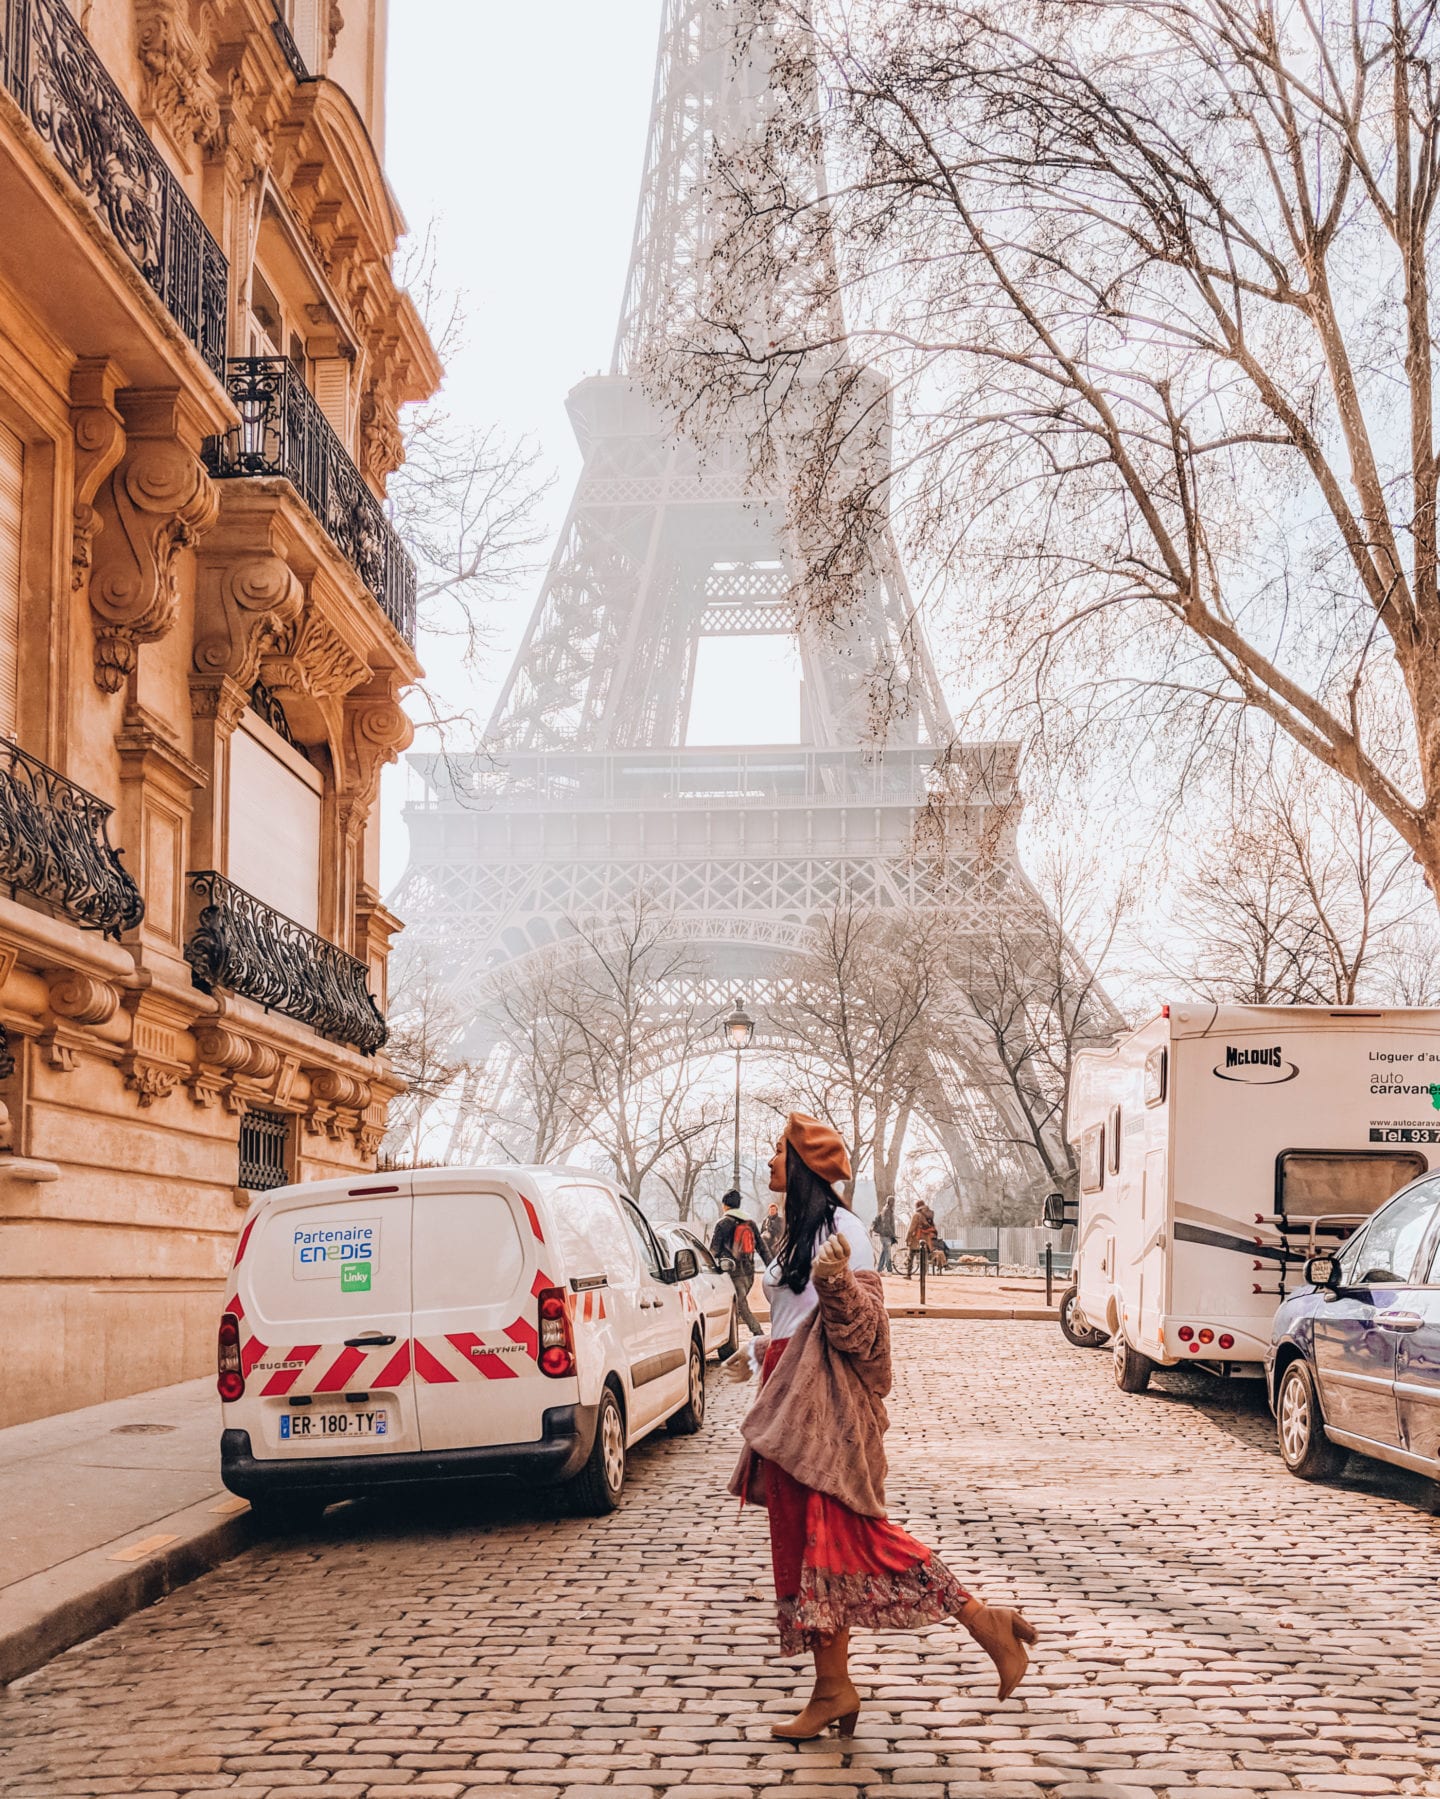 Paris Winter Fashion Guide + 20 Tips on What to Wear When It's